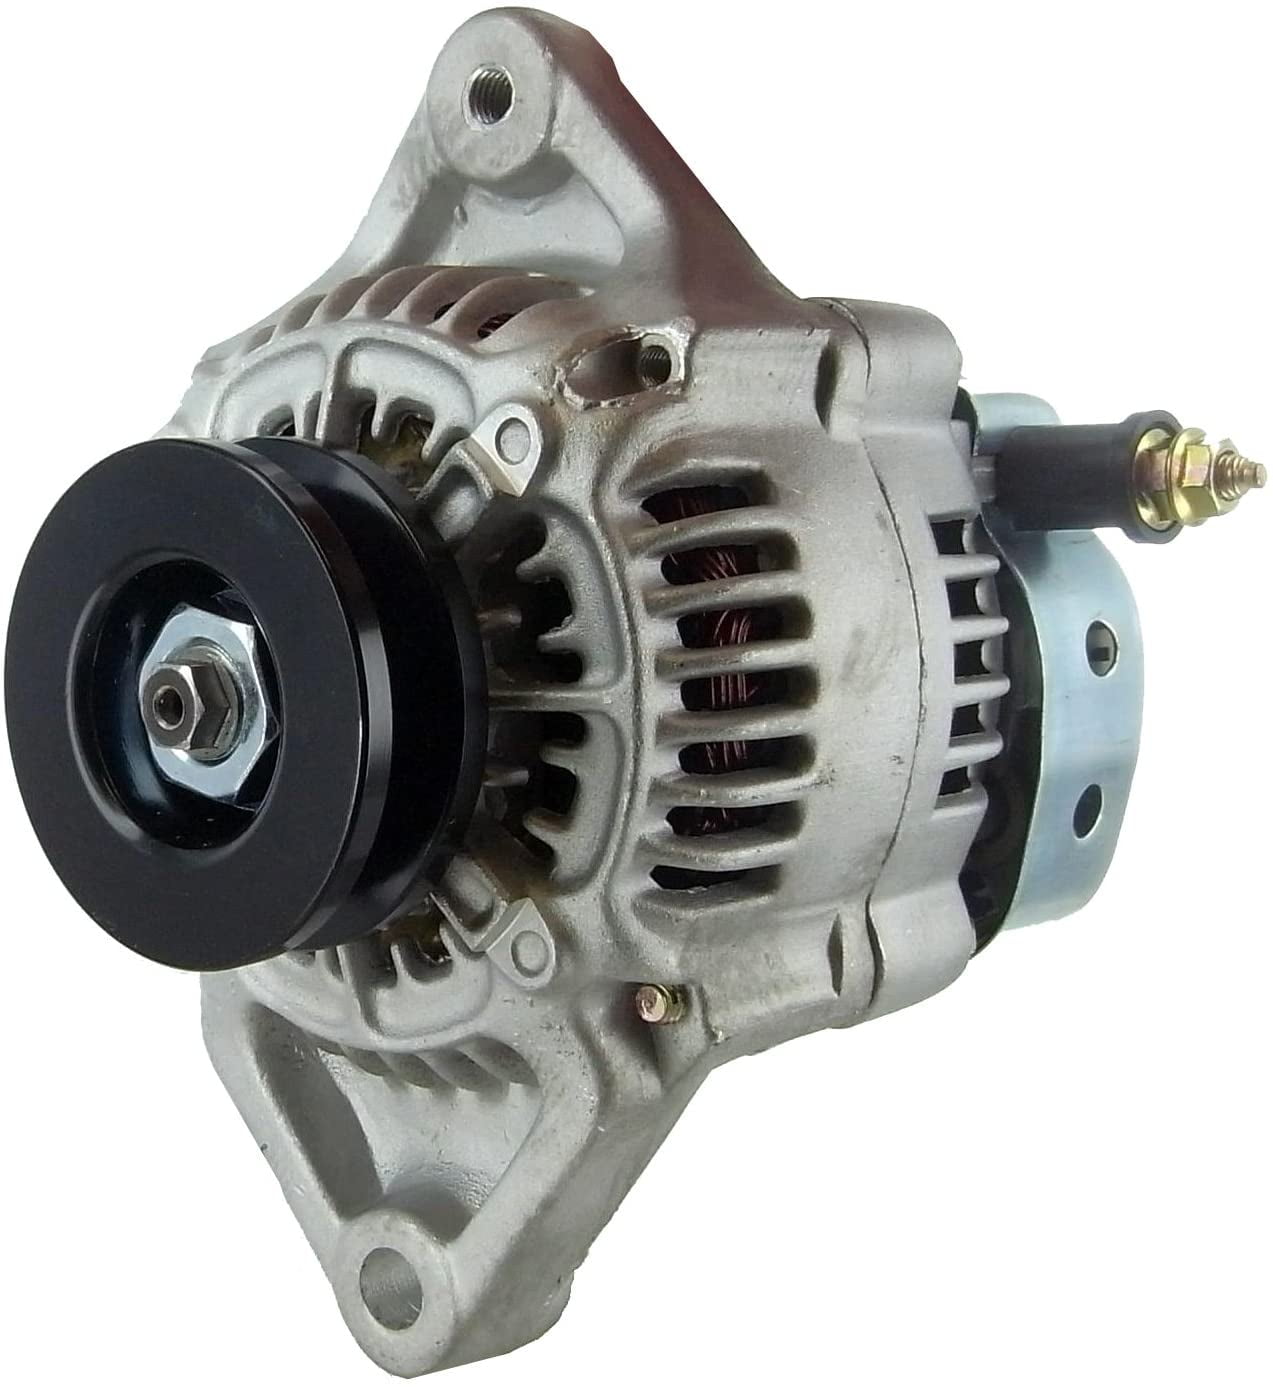 Alternator Replacement For Rigmaster Generator APU T4 402-05 Perkins Heater/Cooler 12 Volts 60 Amps 